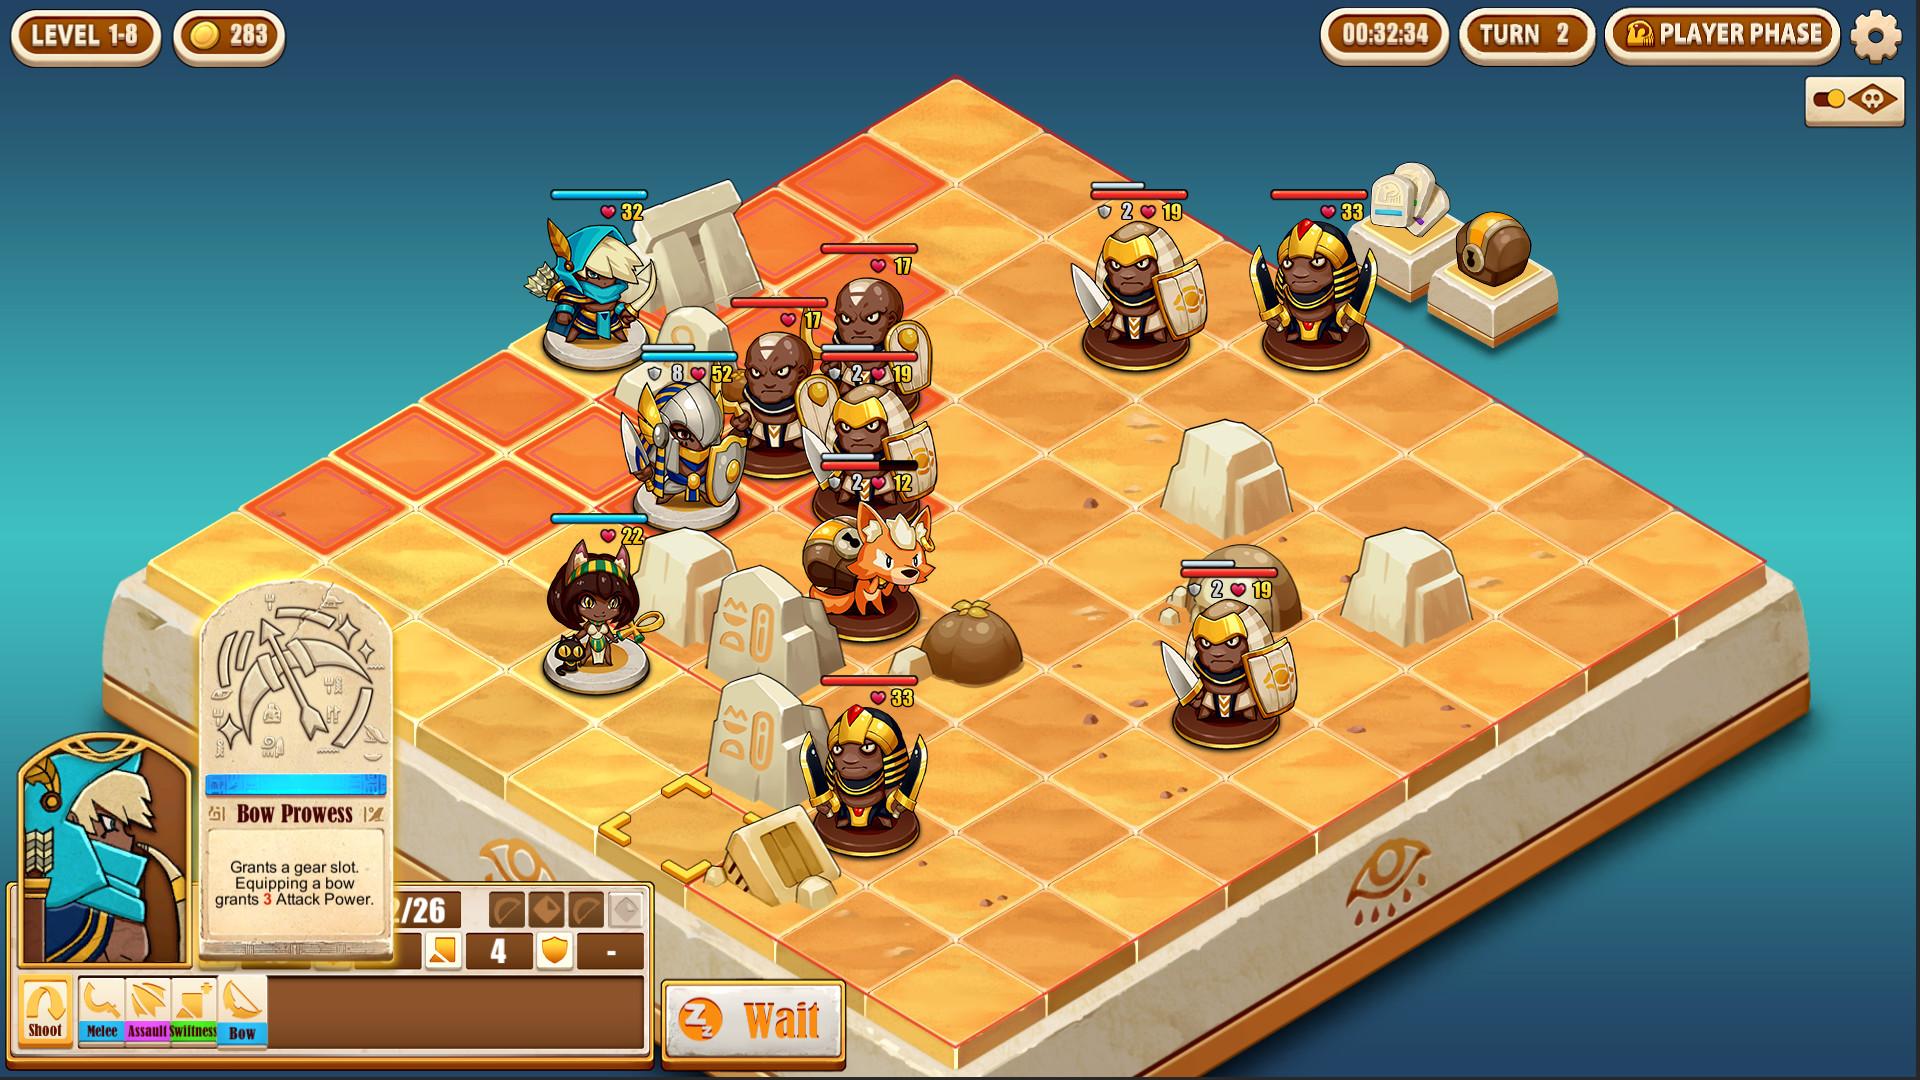 Screenshot №1 from game Warriors of the Nile